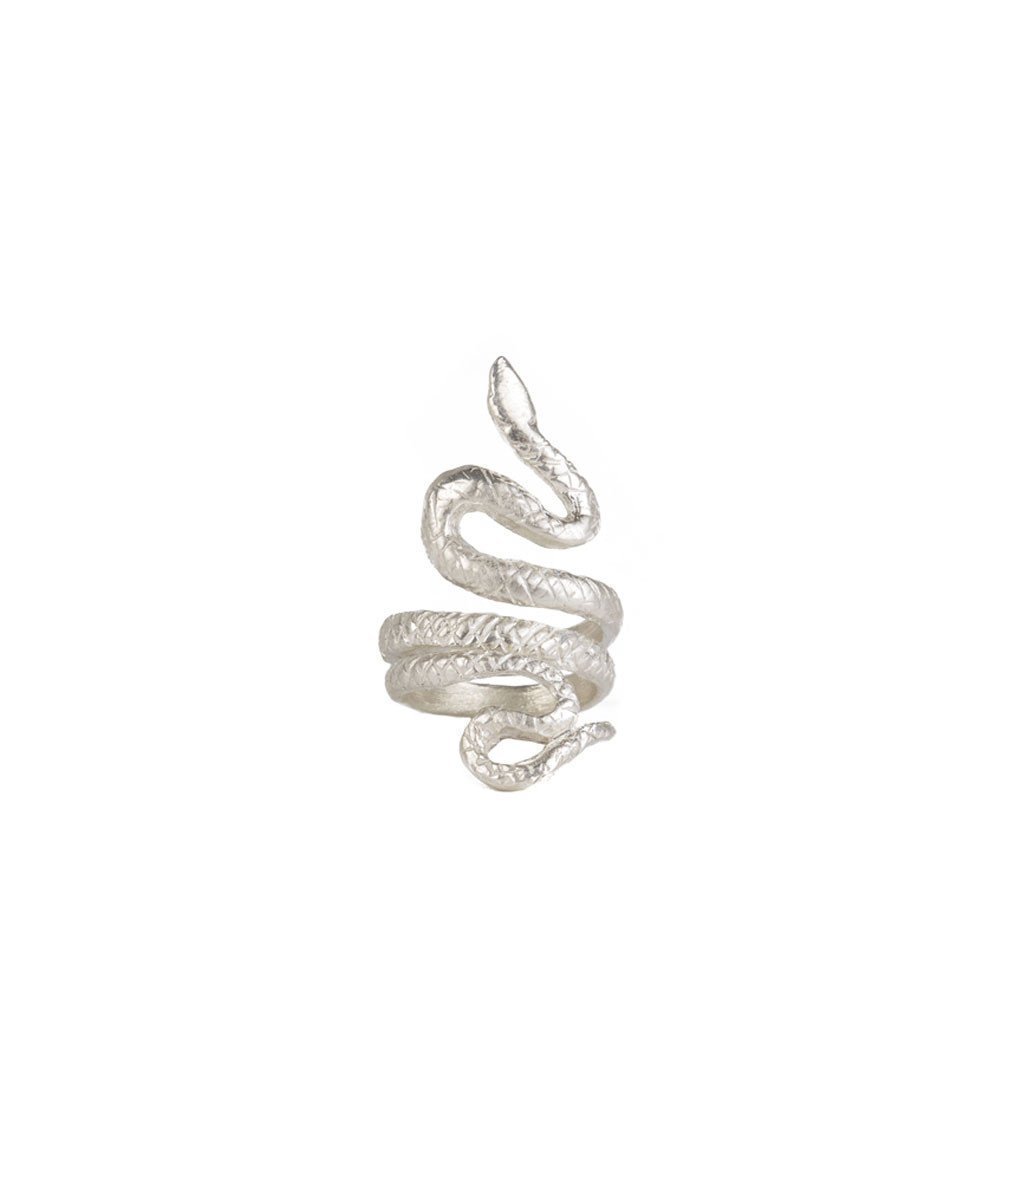 Silver Pinky Finger Snake Ring - LAURA CANTU JEWELRY US